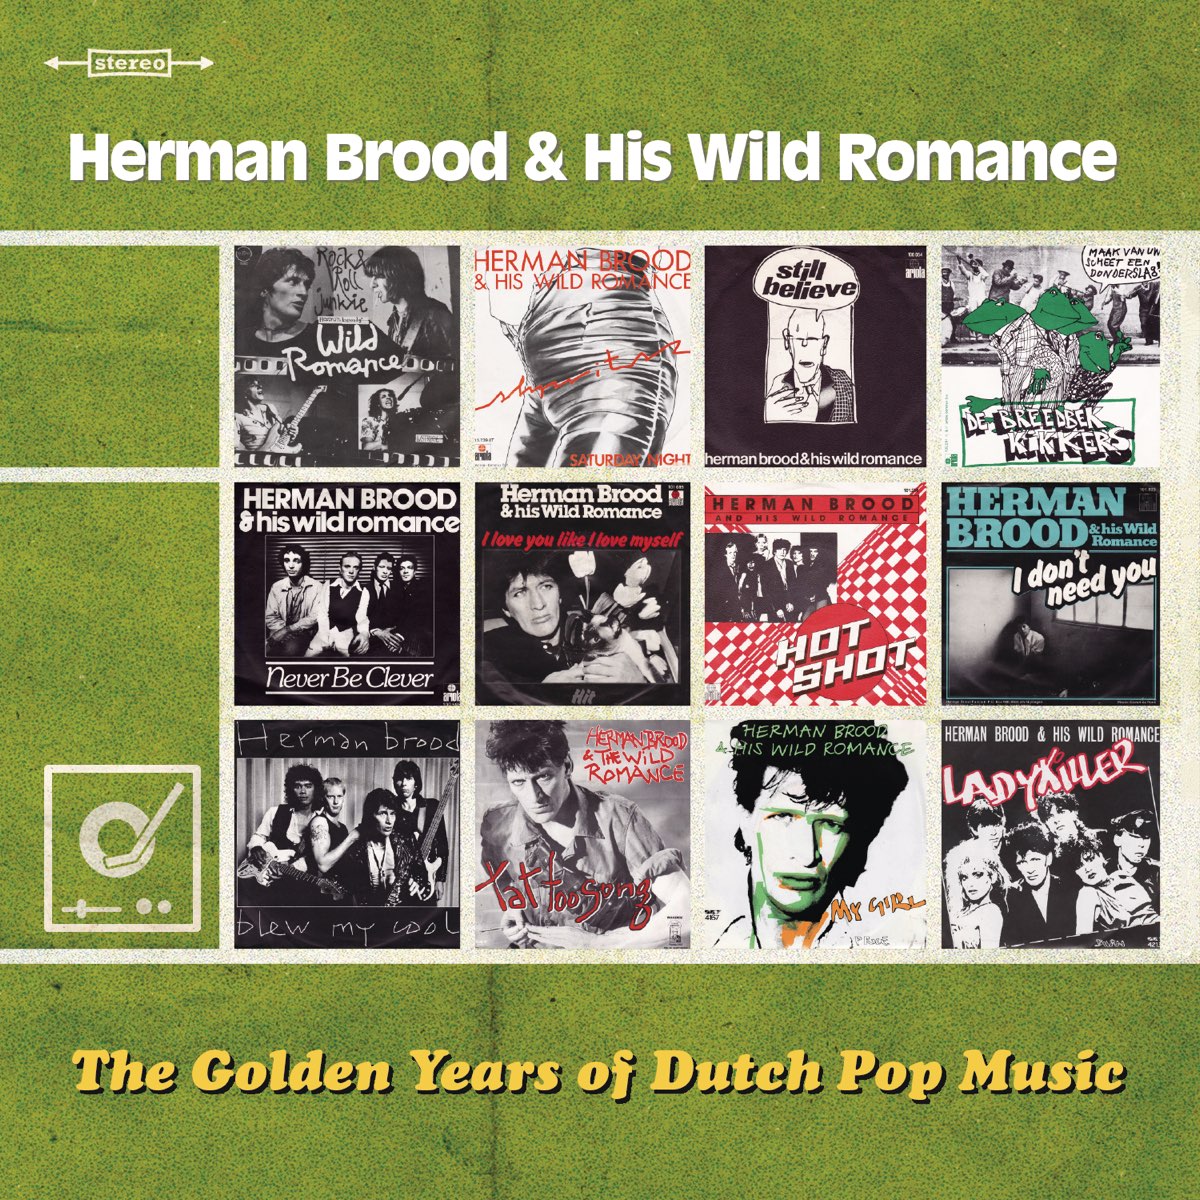 The Golden Years of Dutch Pop Music by Herman Brood & His Wild